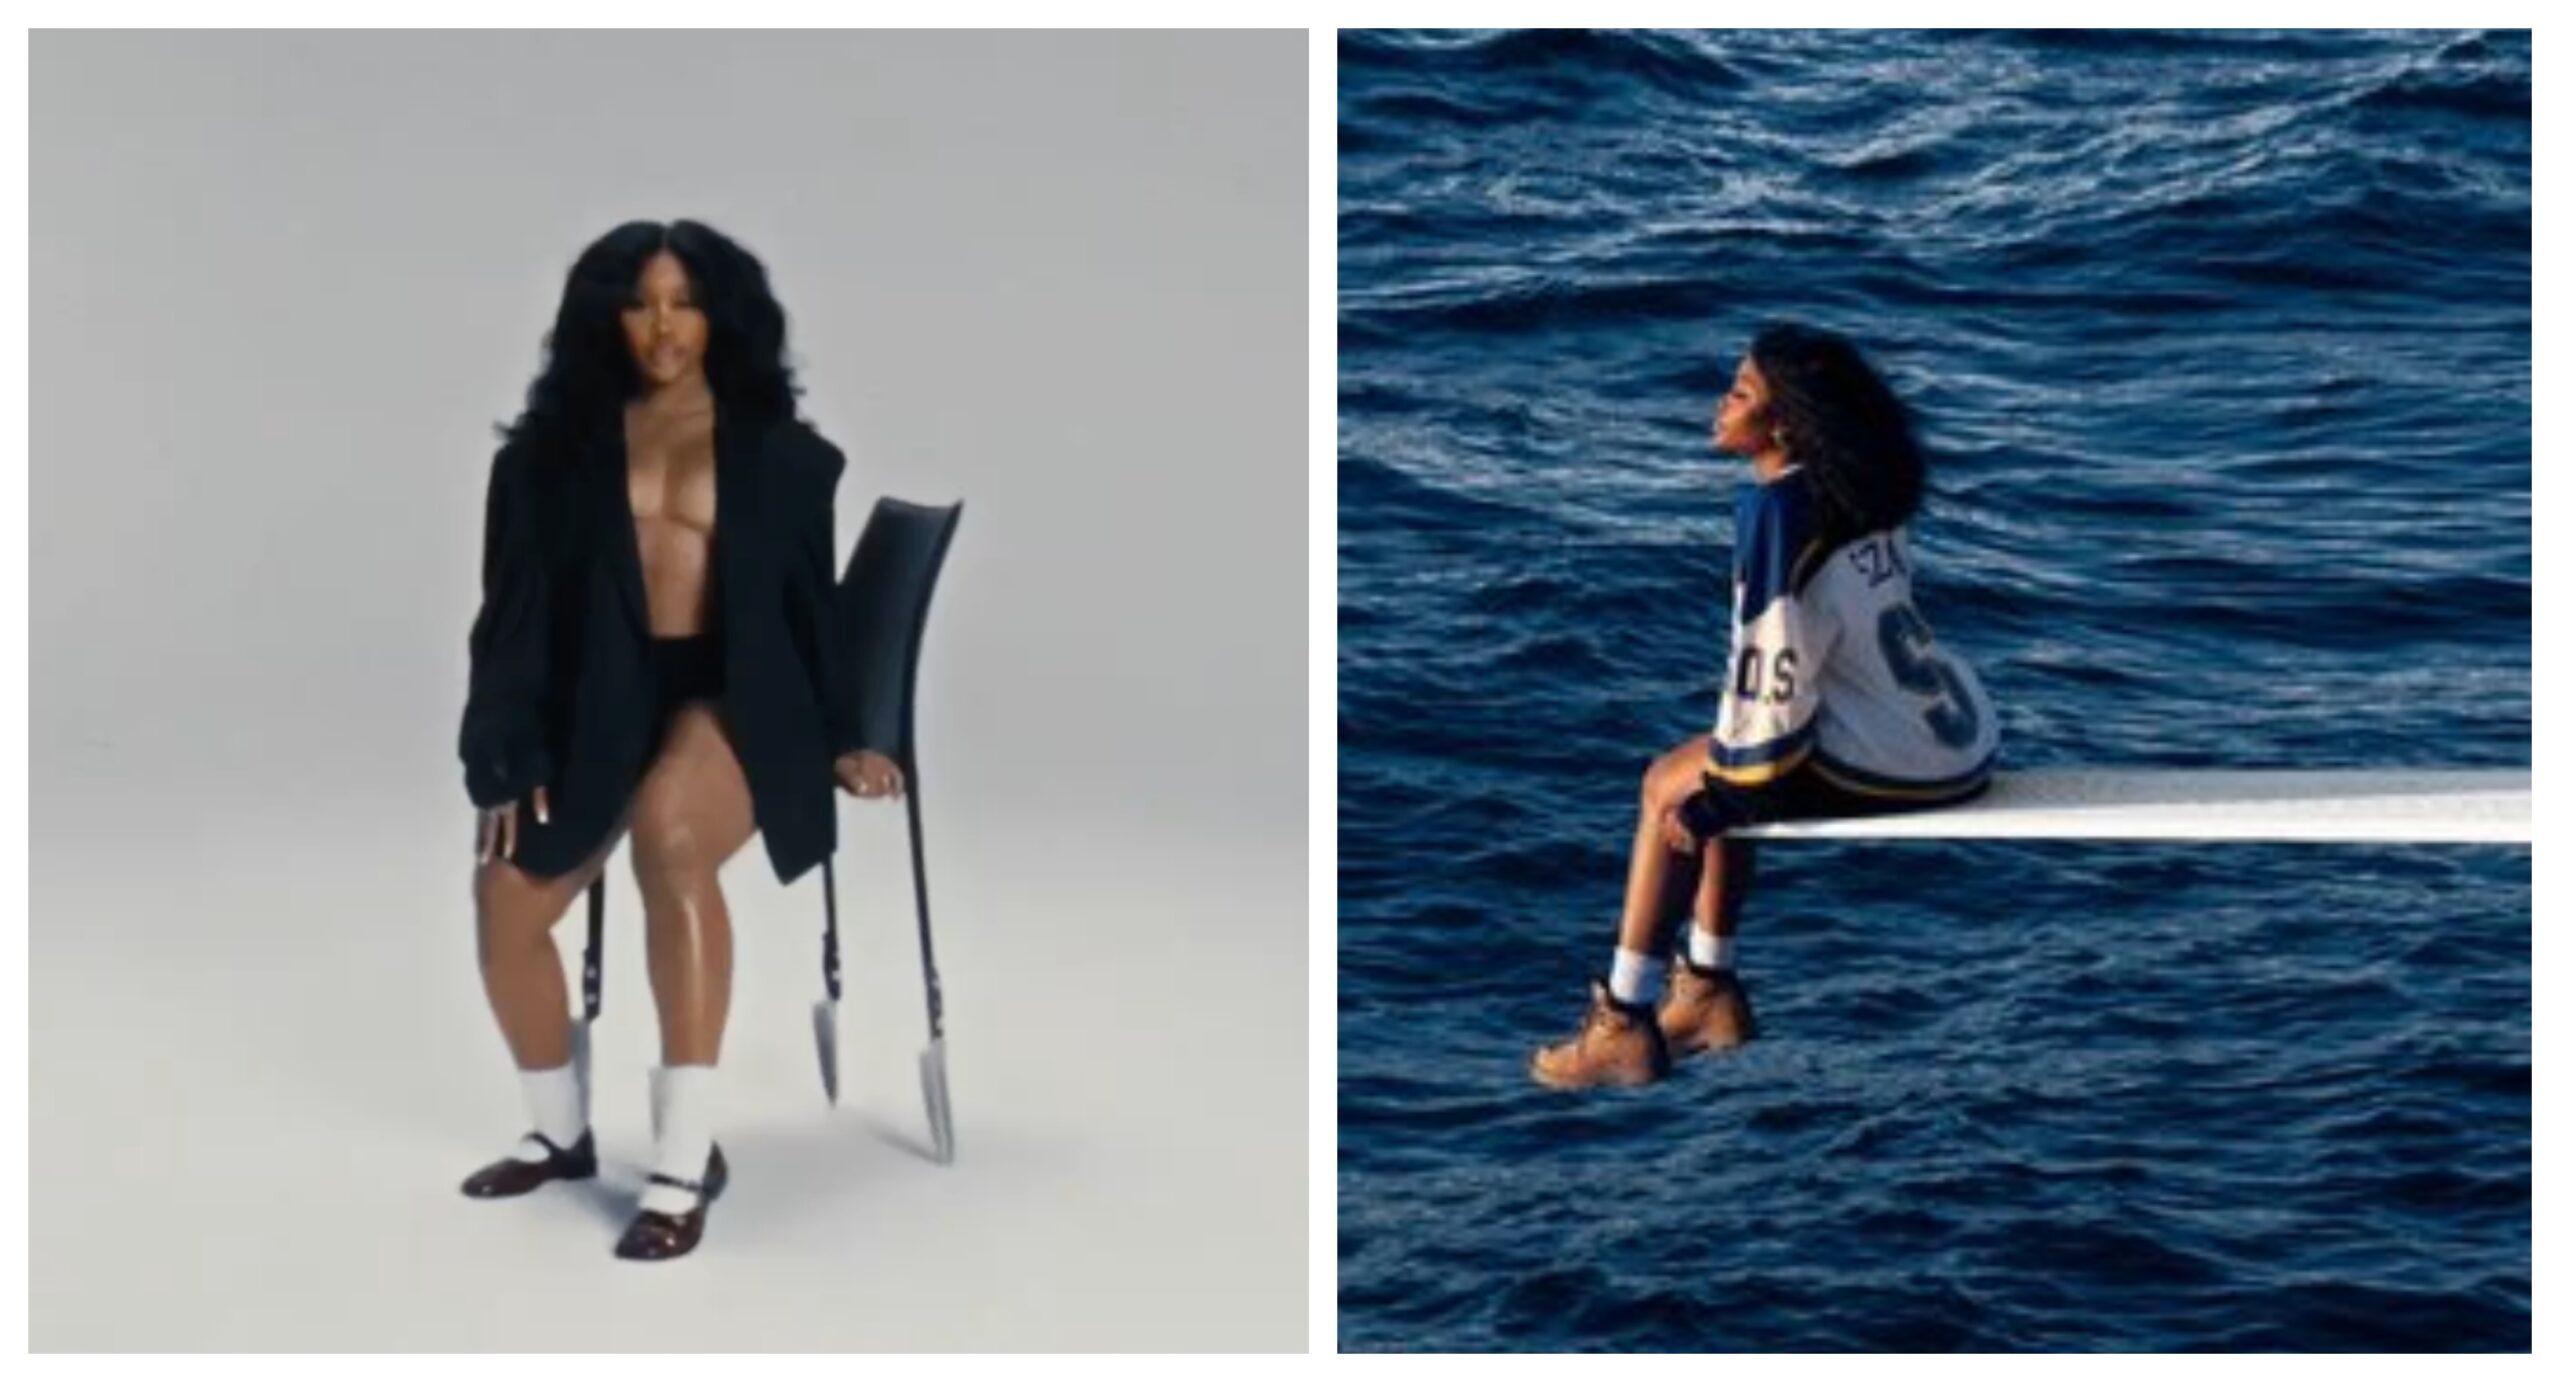 SZA Announces 'S.O.S' Album Release Date in Stunning Trailer That